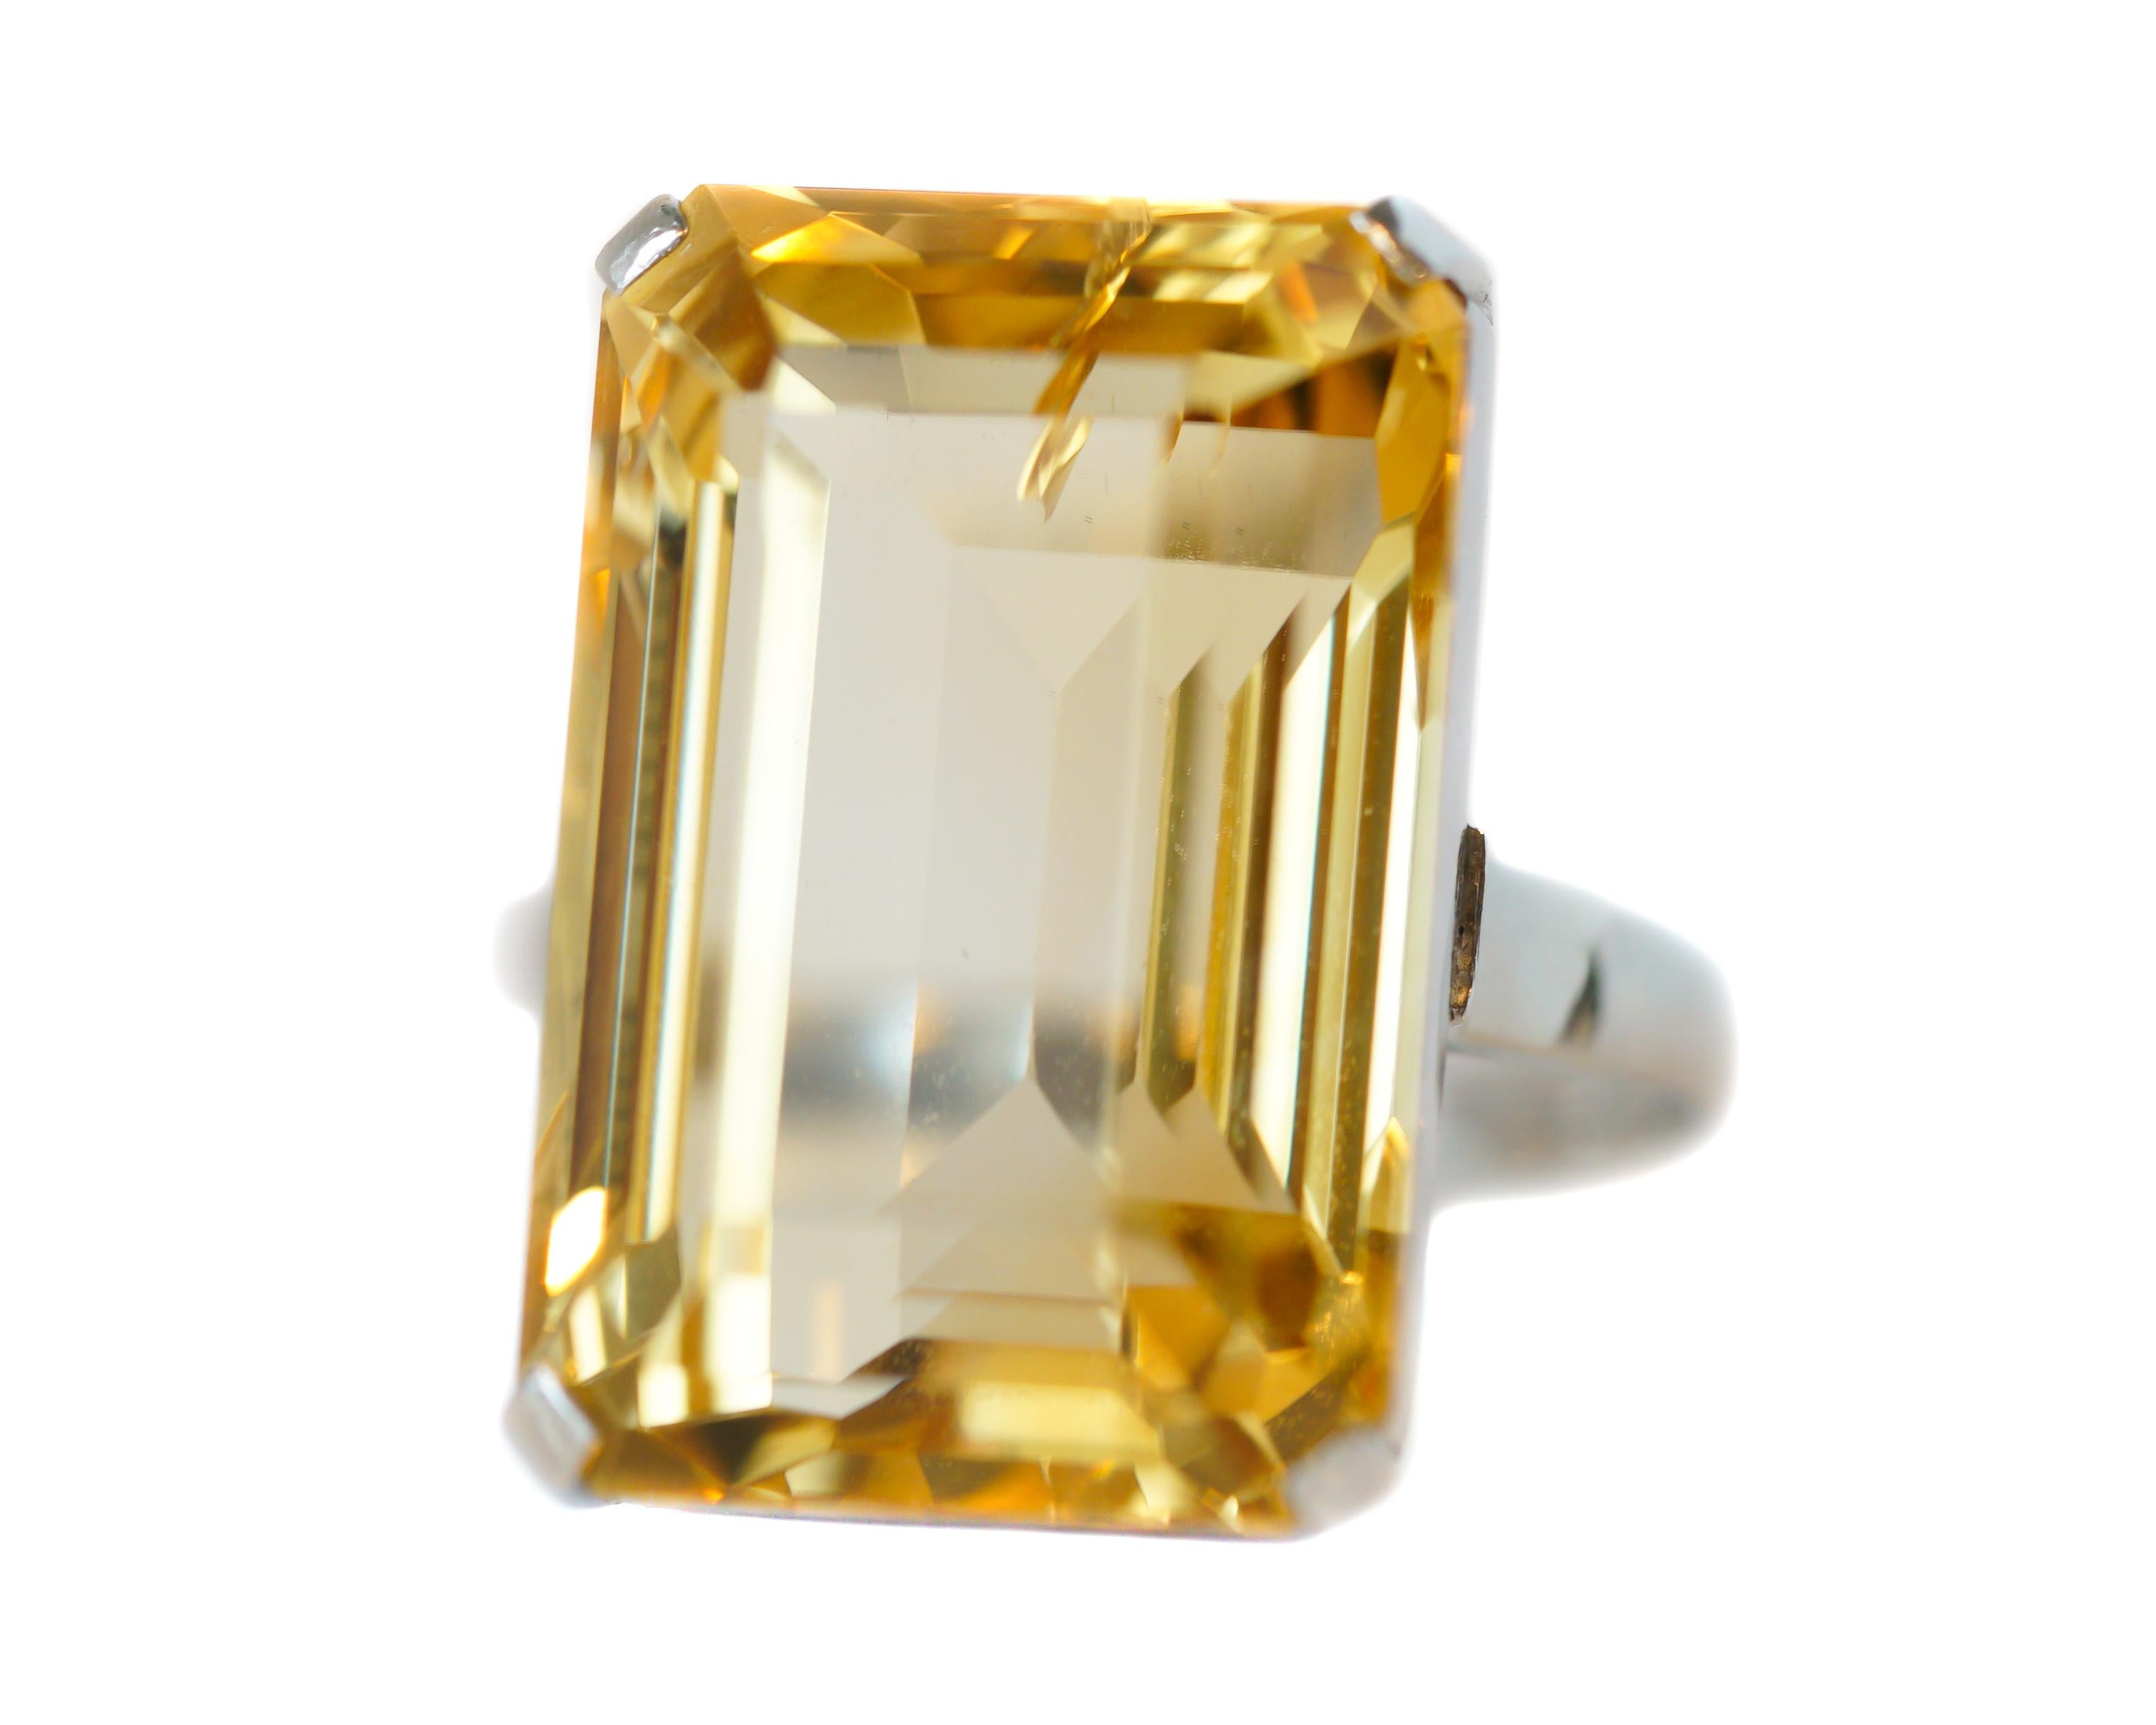 This gorgeous solitaire ring features a 20 carat Emerald cut Citrine. This stunning prong set gemstone is presented in a 14 karat White Gold setting with a decorative, open cutout, Art Deco- inspired gallery. 

Ring Details:
Size: 6, can be